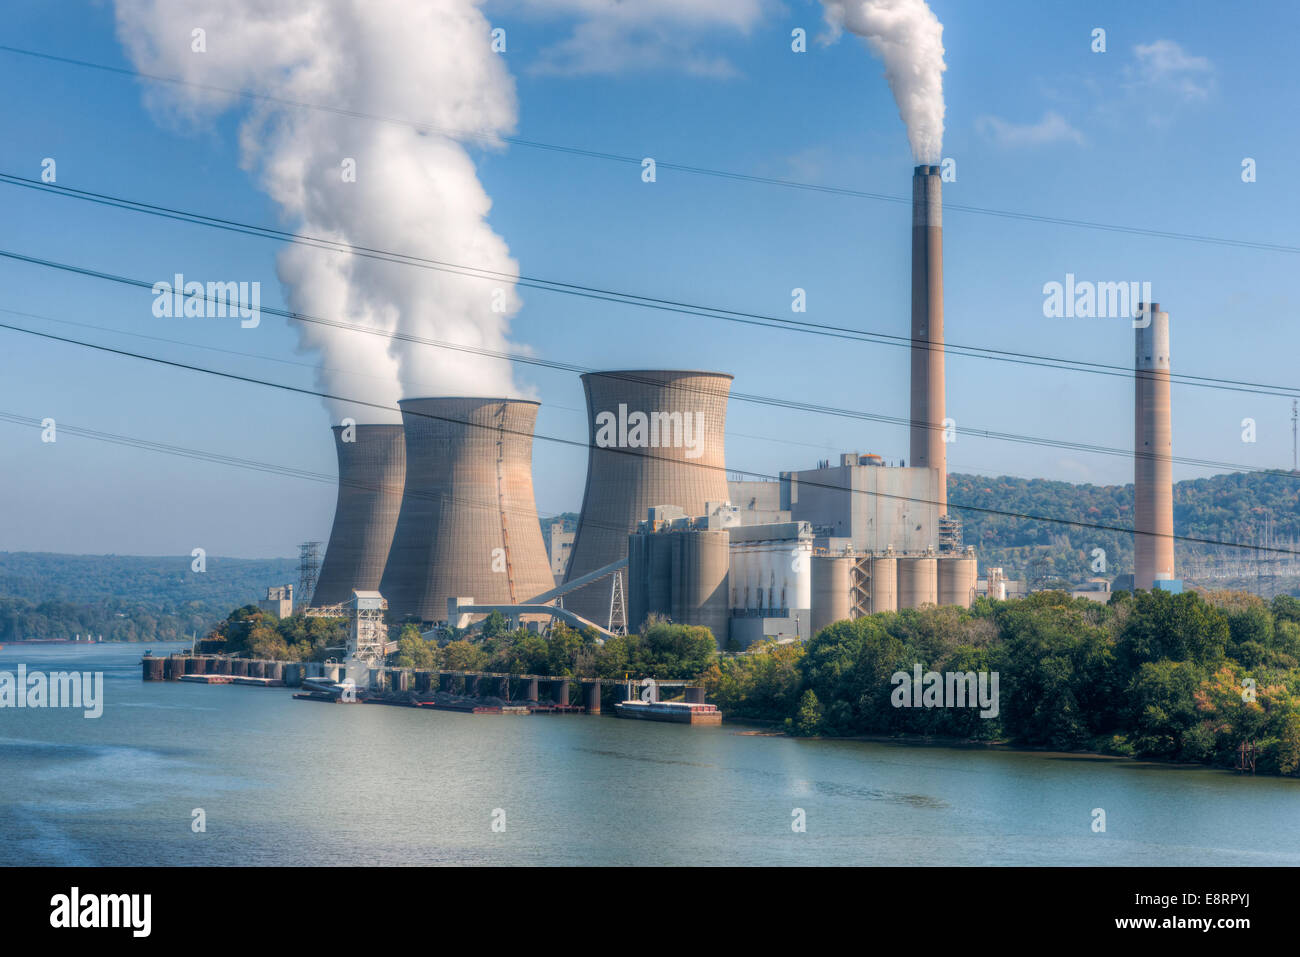 The Bruce Mansfield Power Station, a coal-fired power station operated by FirstEnergy on the Ohio River near Shippingport, PA. Stock Photo